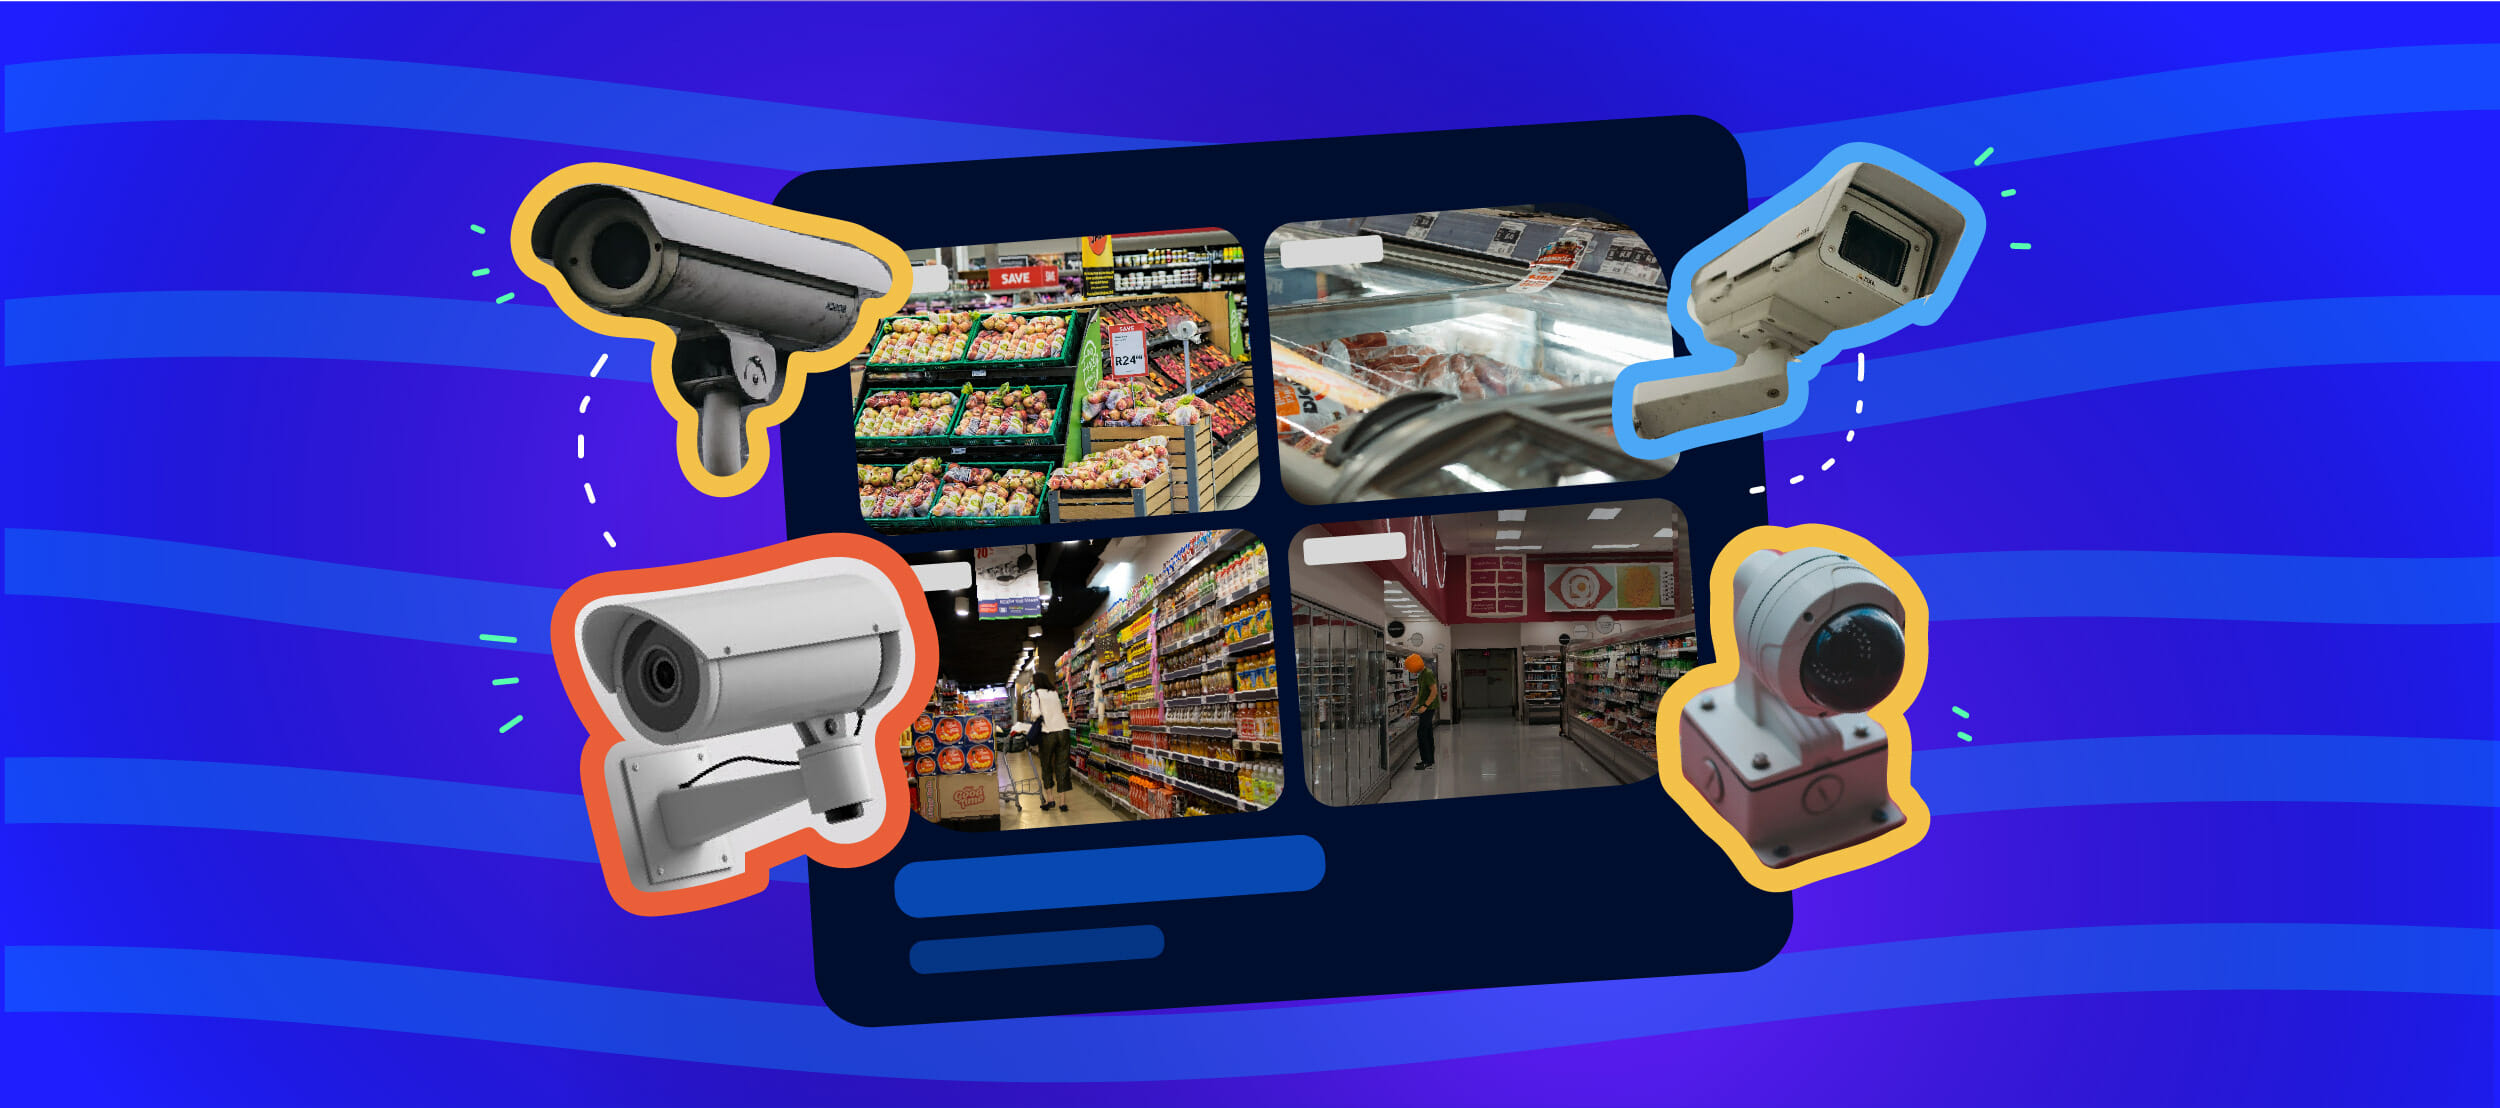 What is Video Surveillance System?